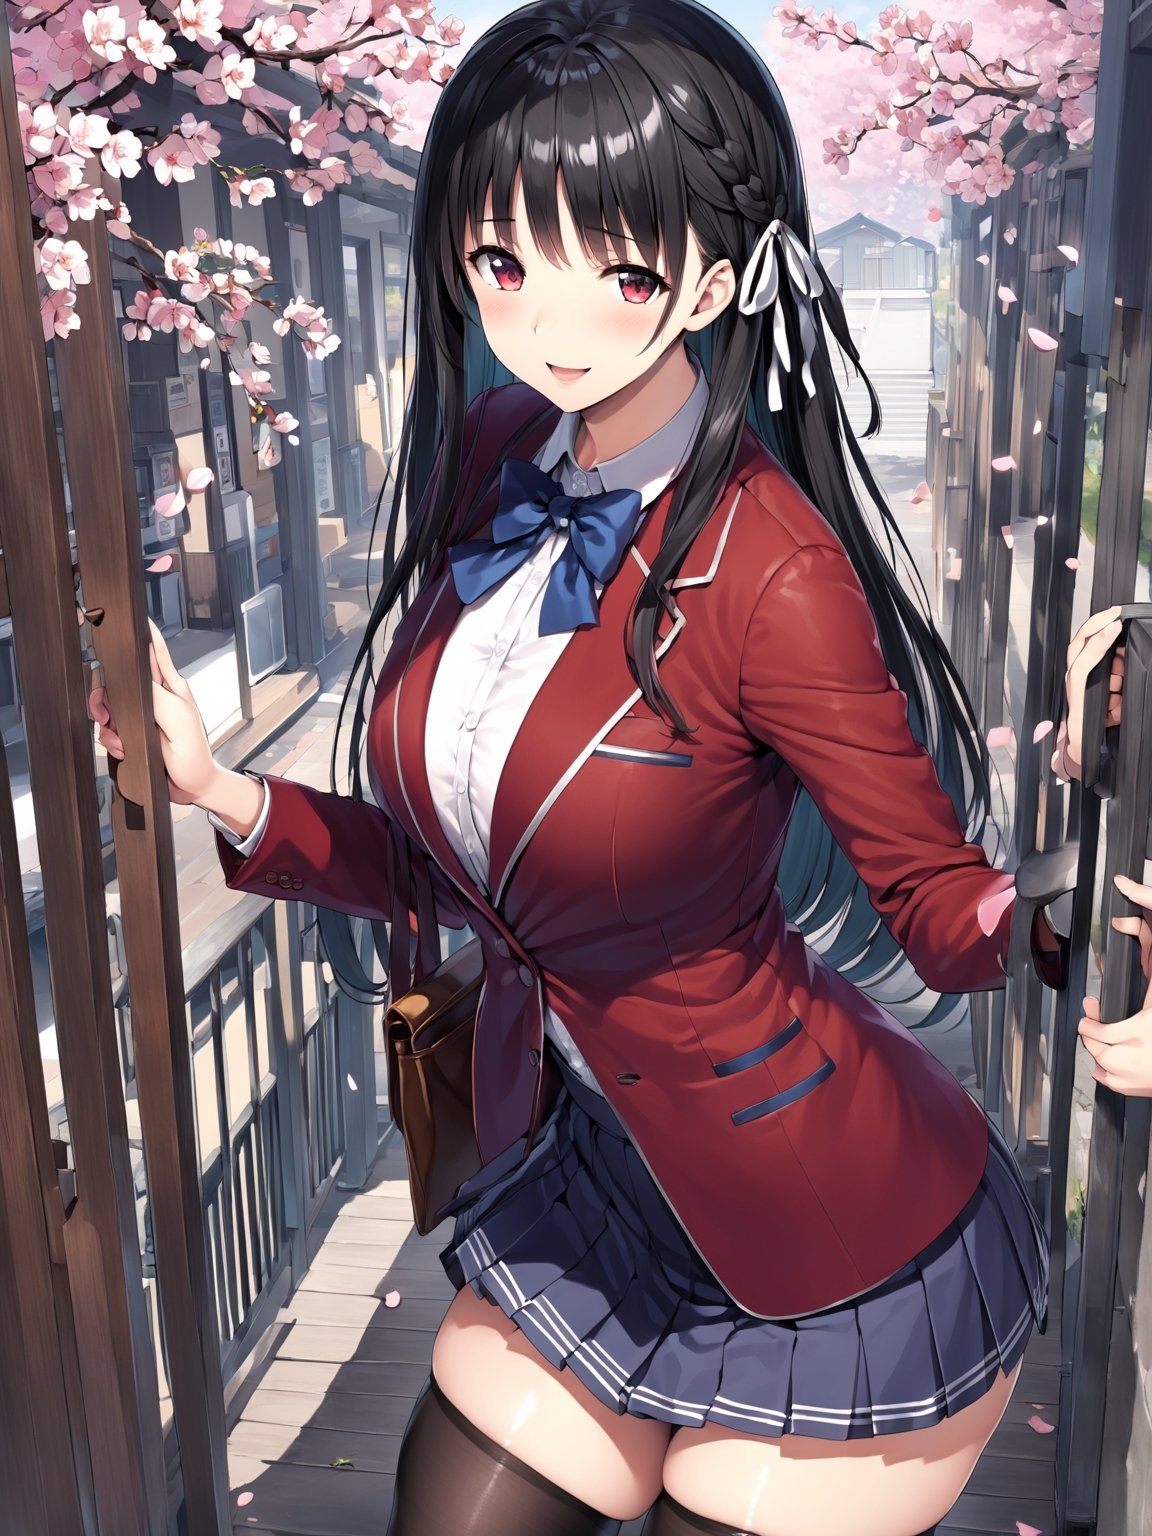 //Quality,
masterpiece, best quality, detailed
,//Character,
,HorikitaSuzune, 1girl, solo, long hair, black hair, shiny hair, red eyes, bangs, braid
,//Fashion,
school uniform, red jacket, hair ribbon, white shirt, pleated skirt, thighhighs
,//Background,
Cherry blossoms, school gate, the staircase of the balcony,

,//Others,
graduation, smile,mature female